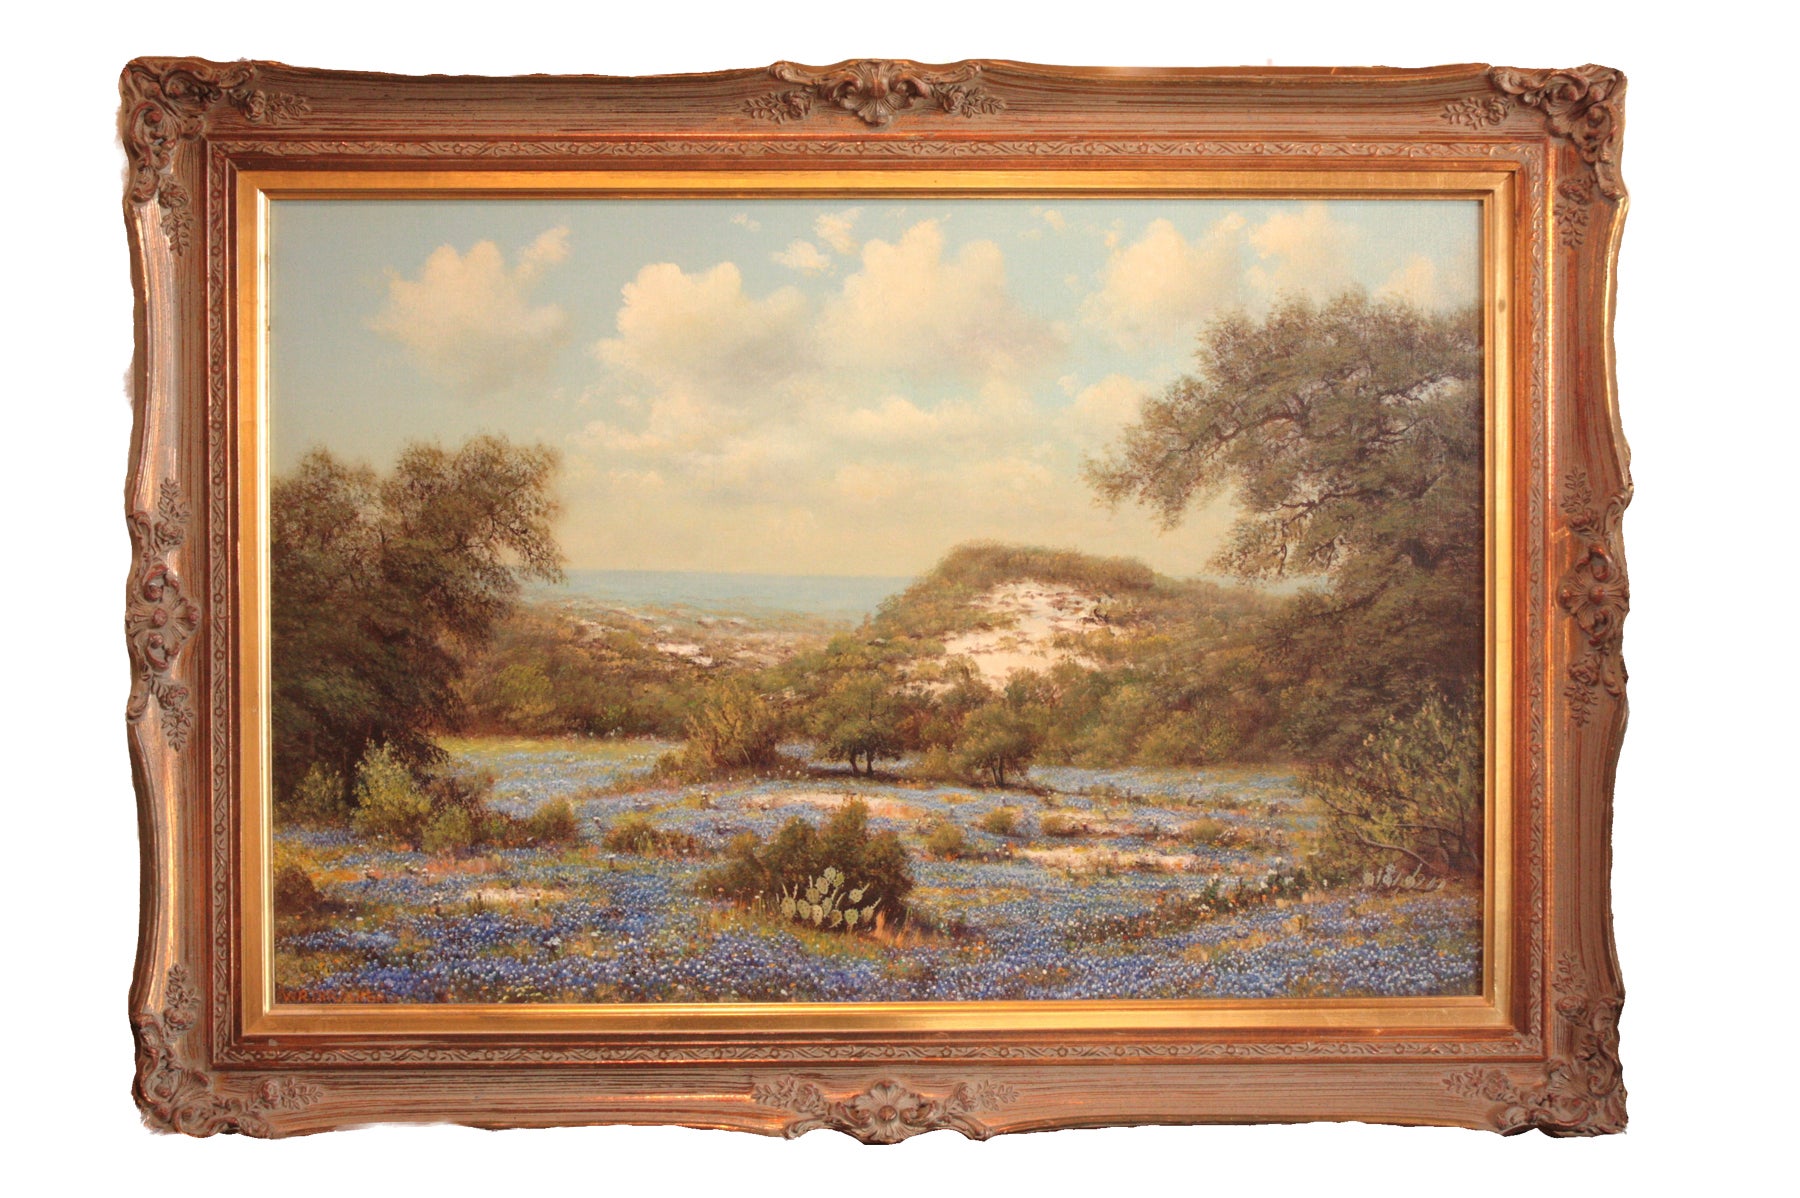 Landscape with Bluebonnets by W. R. Thrasher